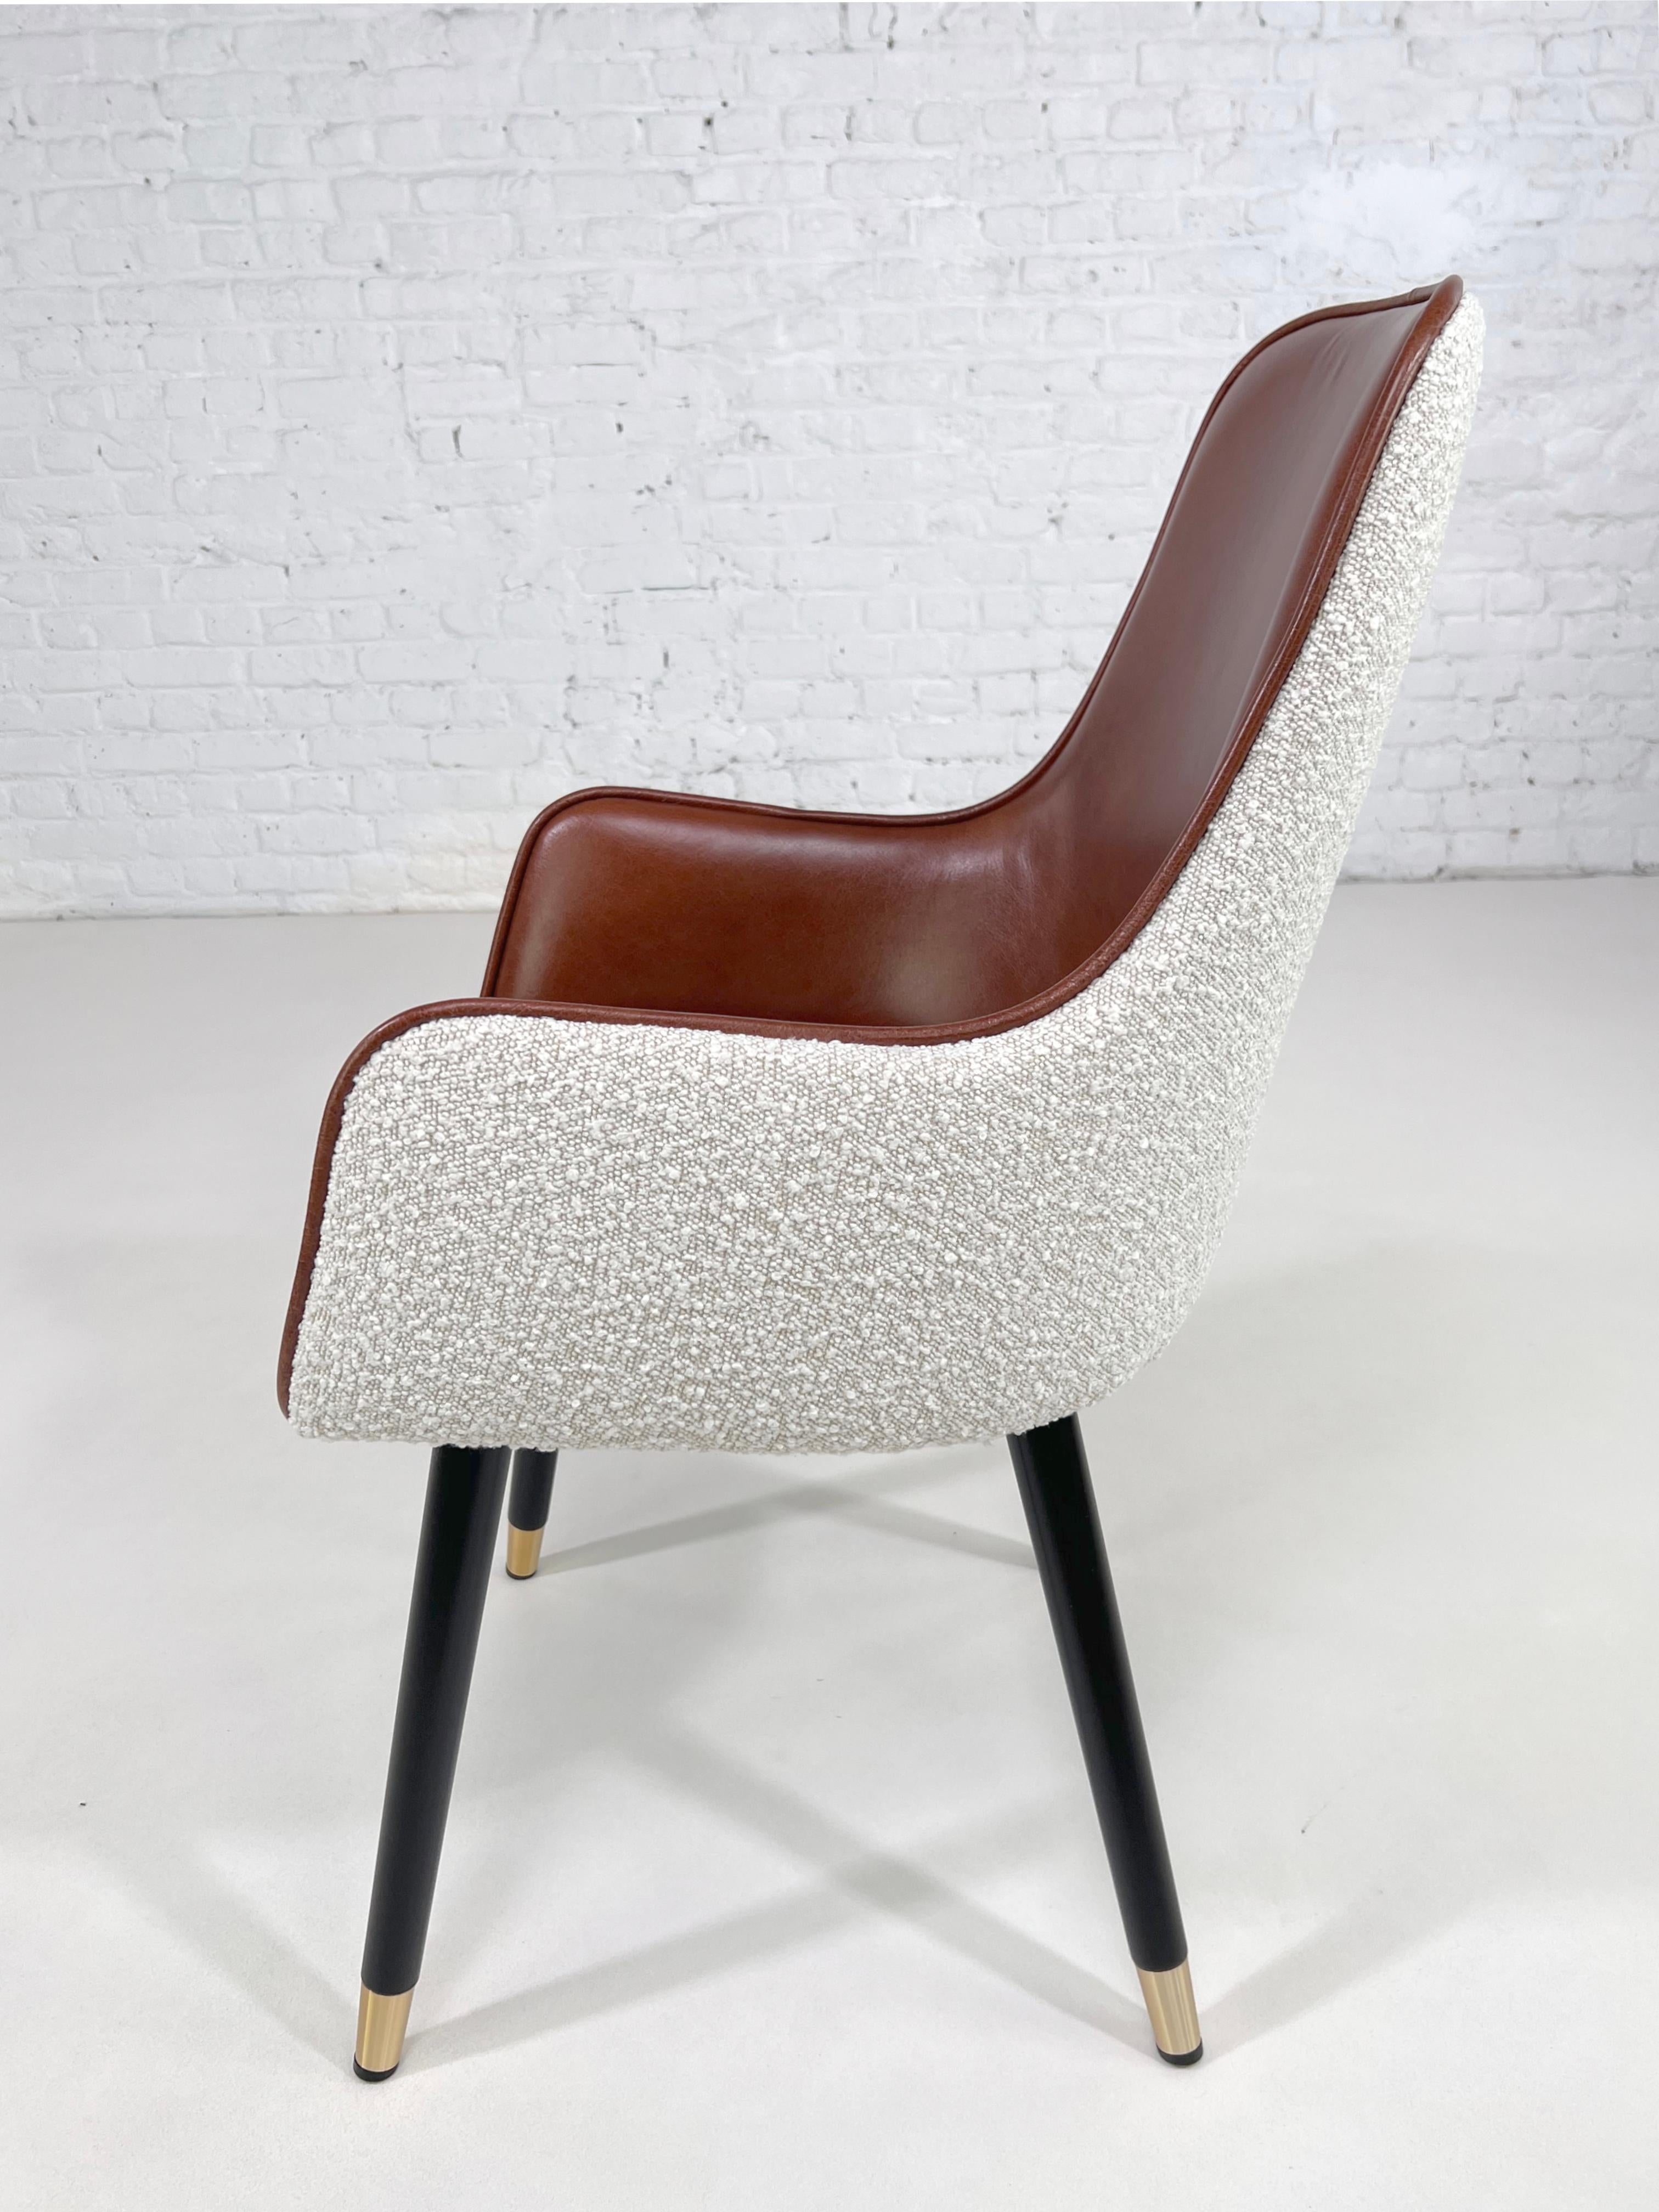 1950s - 1960s MCM Design Scandinavian Style Beige Bouclé Fabric With Cognac Leather Finishes Swivel Armchair composed of a black lacquered wooden feet brass finishes and a comfy seat in a cognac leather seat with beige bouclé fabric back.